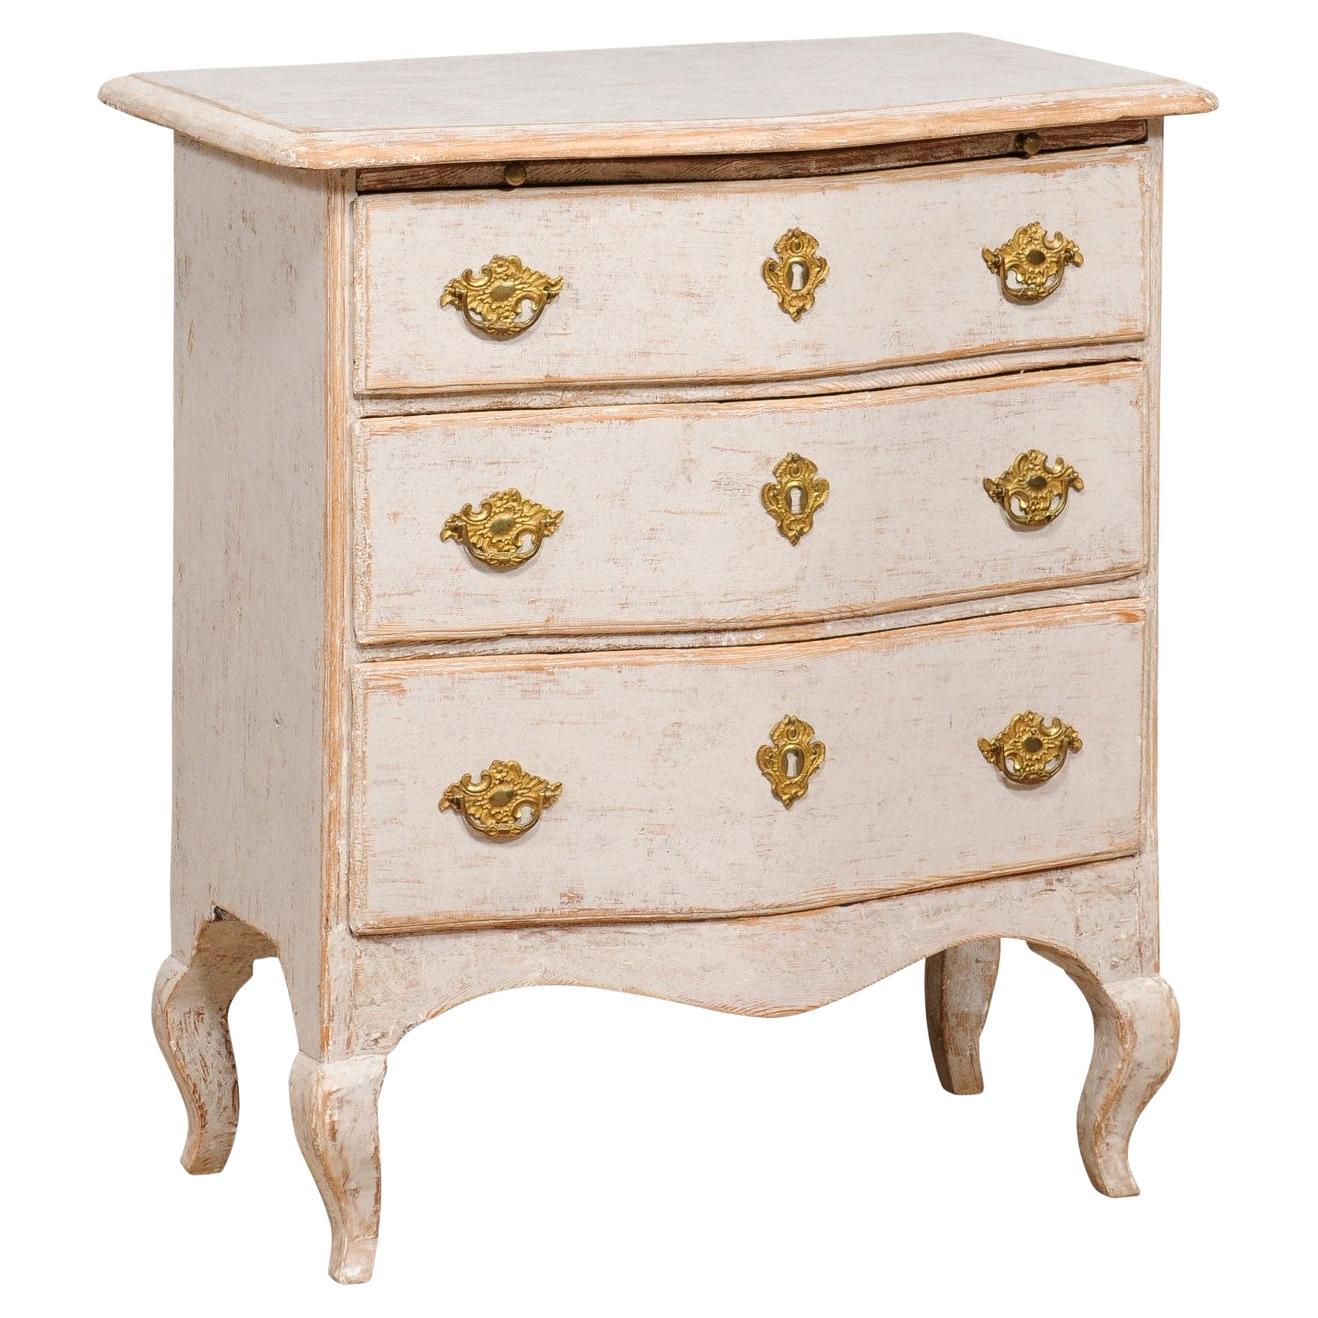 1760s Rococo Period Swedish Light Grey Painted Chest of Drawers with Pull-Out